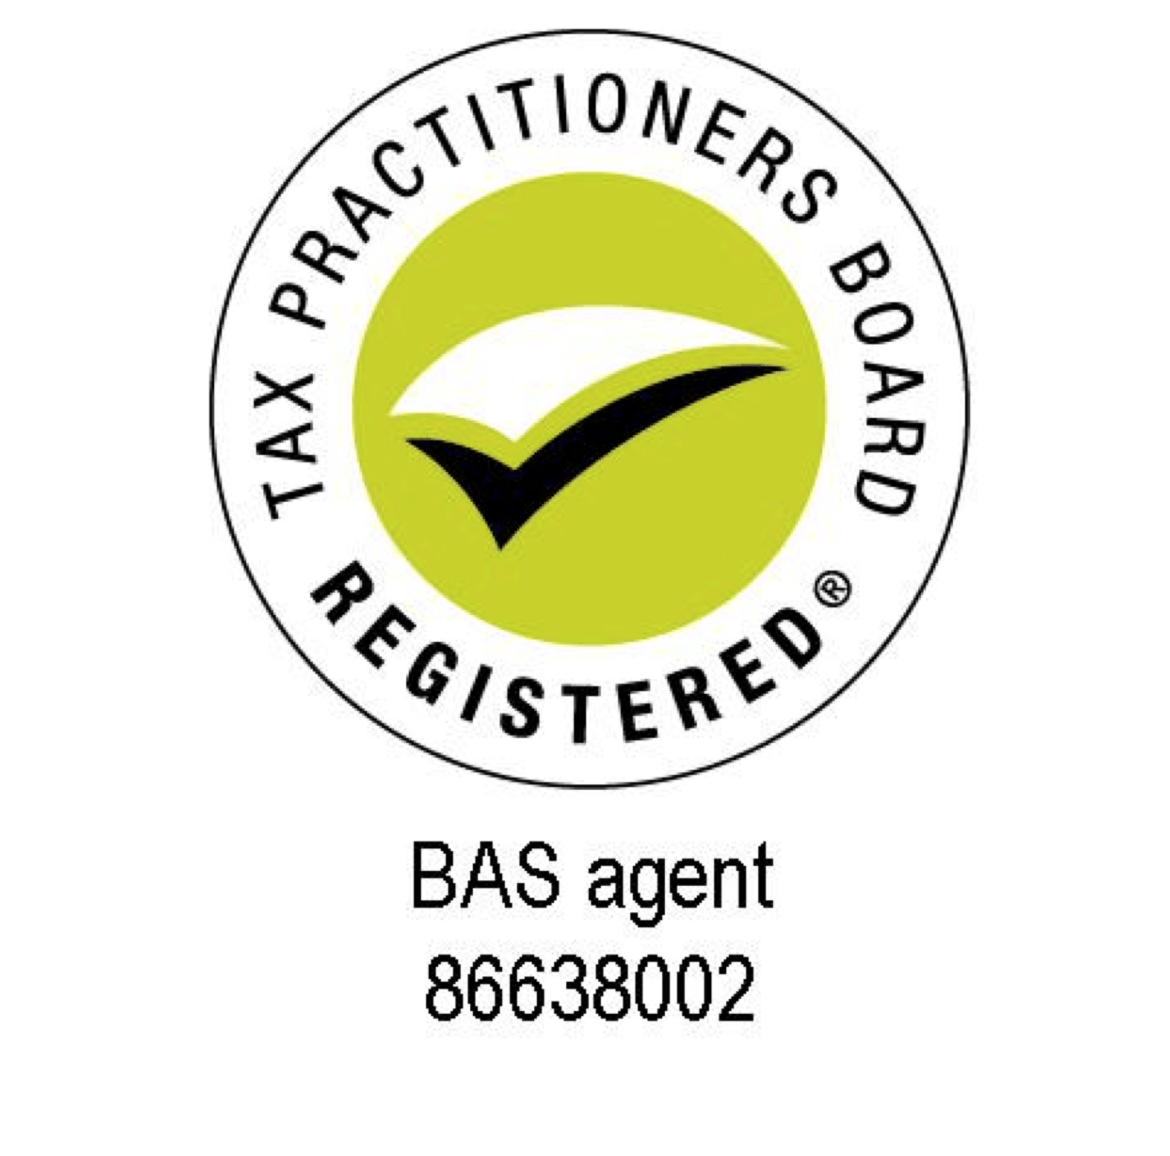 Is your bookkeeper a Registered BAS Agent?